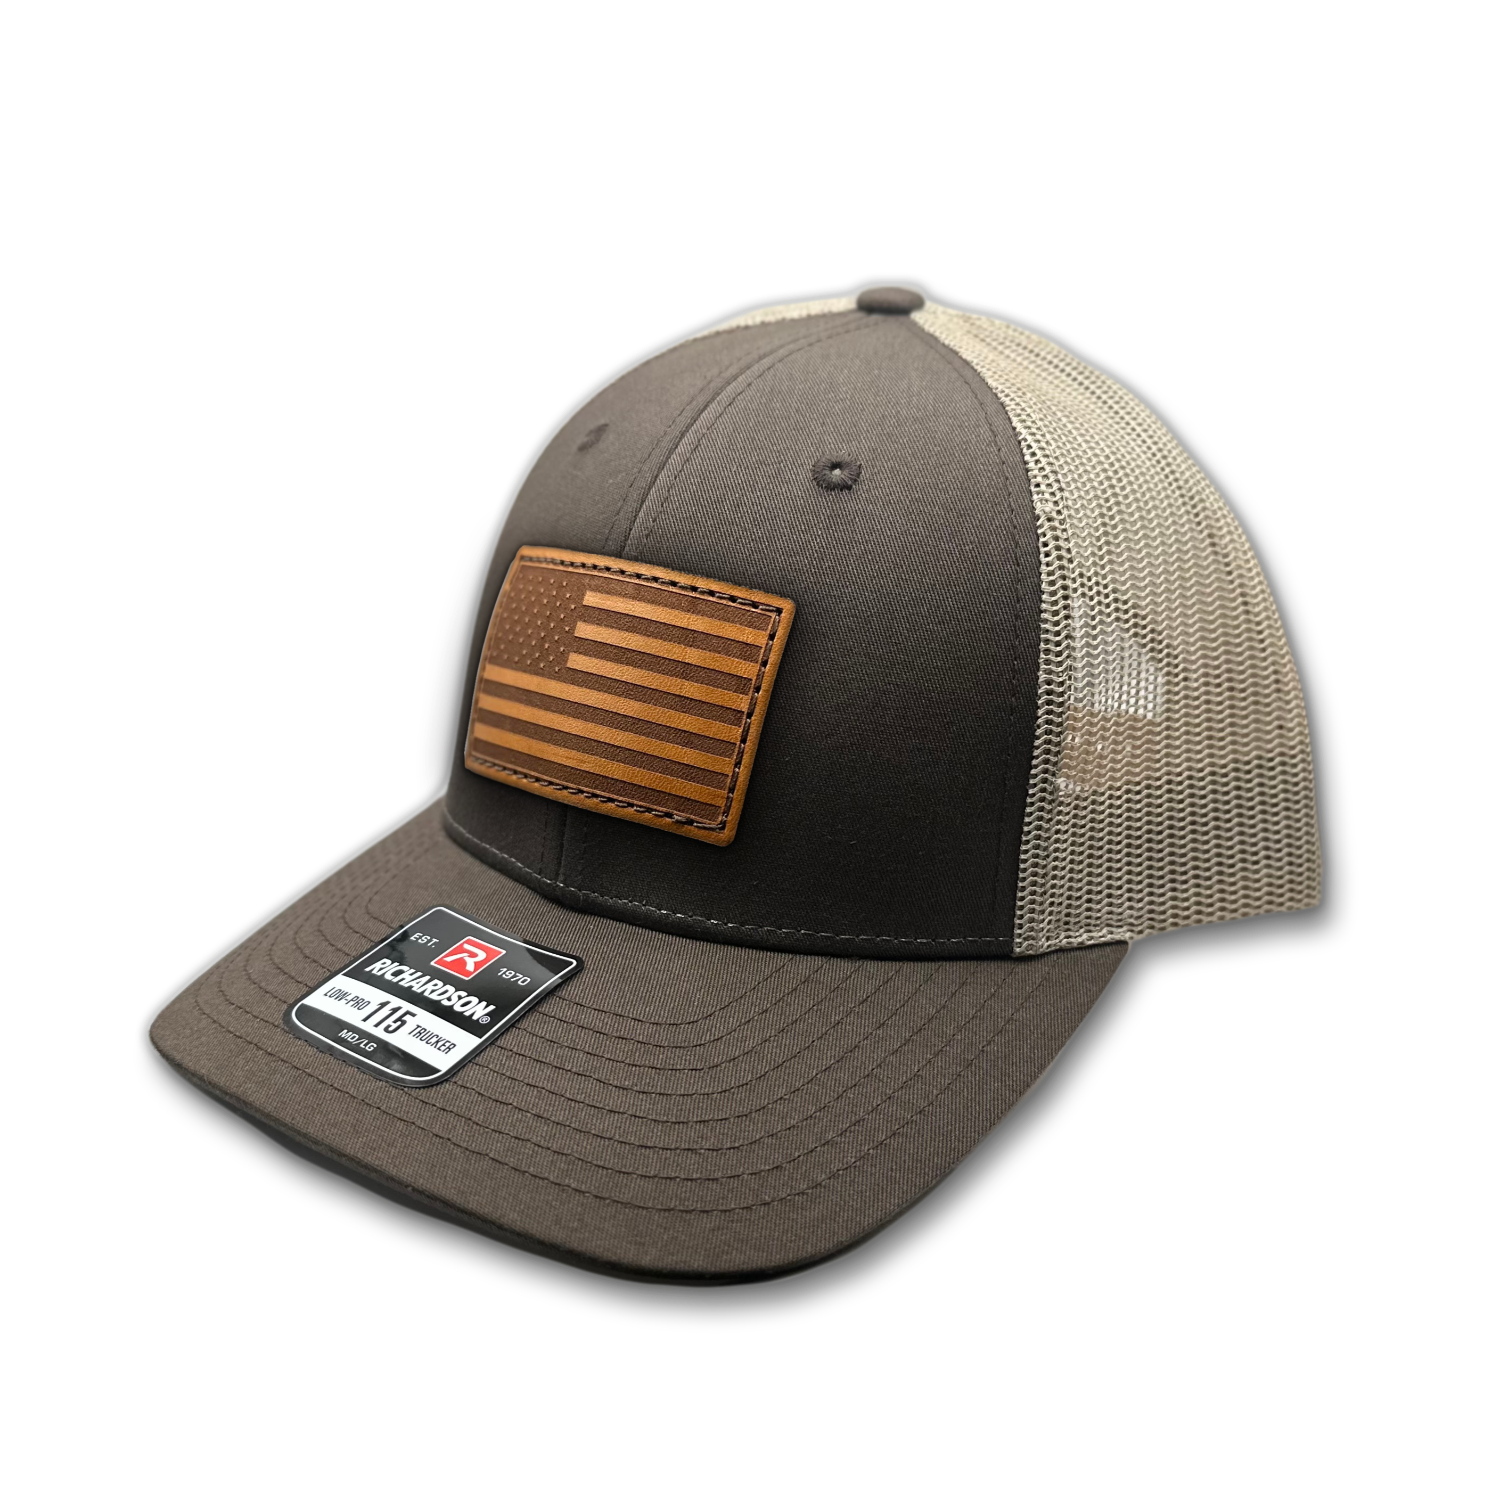 Image of a Brown/Khaki Richardson 115 hat with an American flag patch made of genuine leather, laser engraved and securely sewn onto the hat. The low profile trucker style hat is adjustable to fit small or M/L sizes, offering a versatile and fashionable accessory for any occasion.